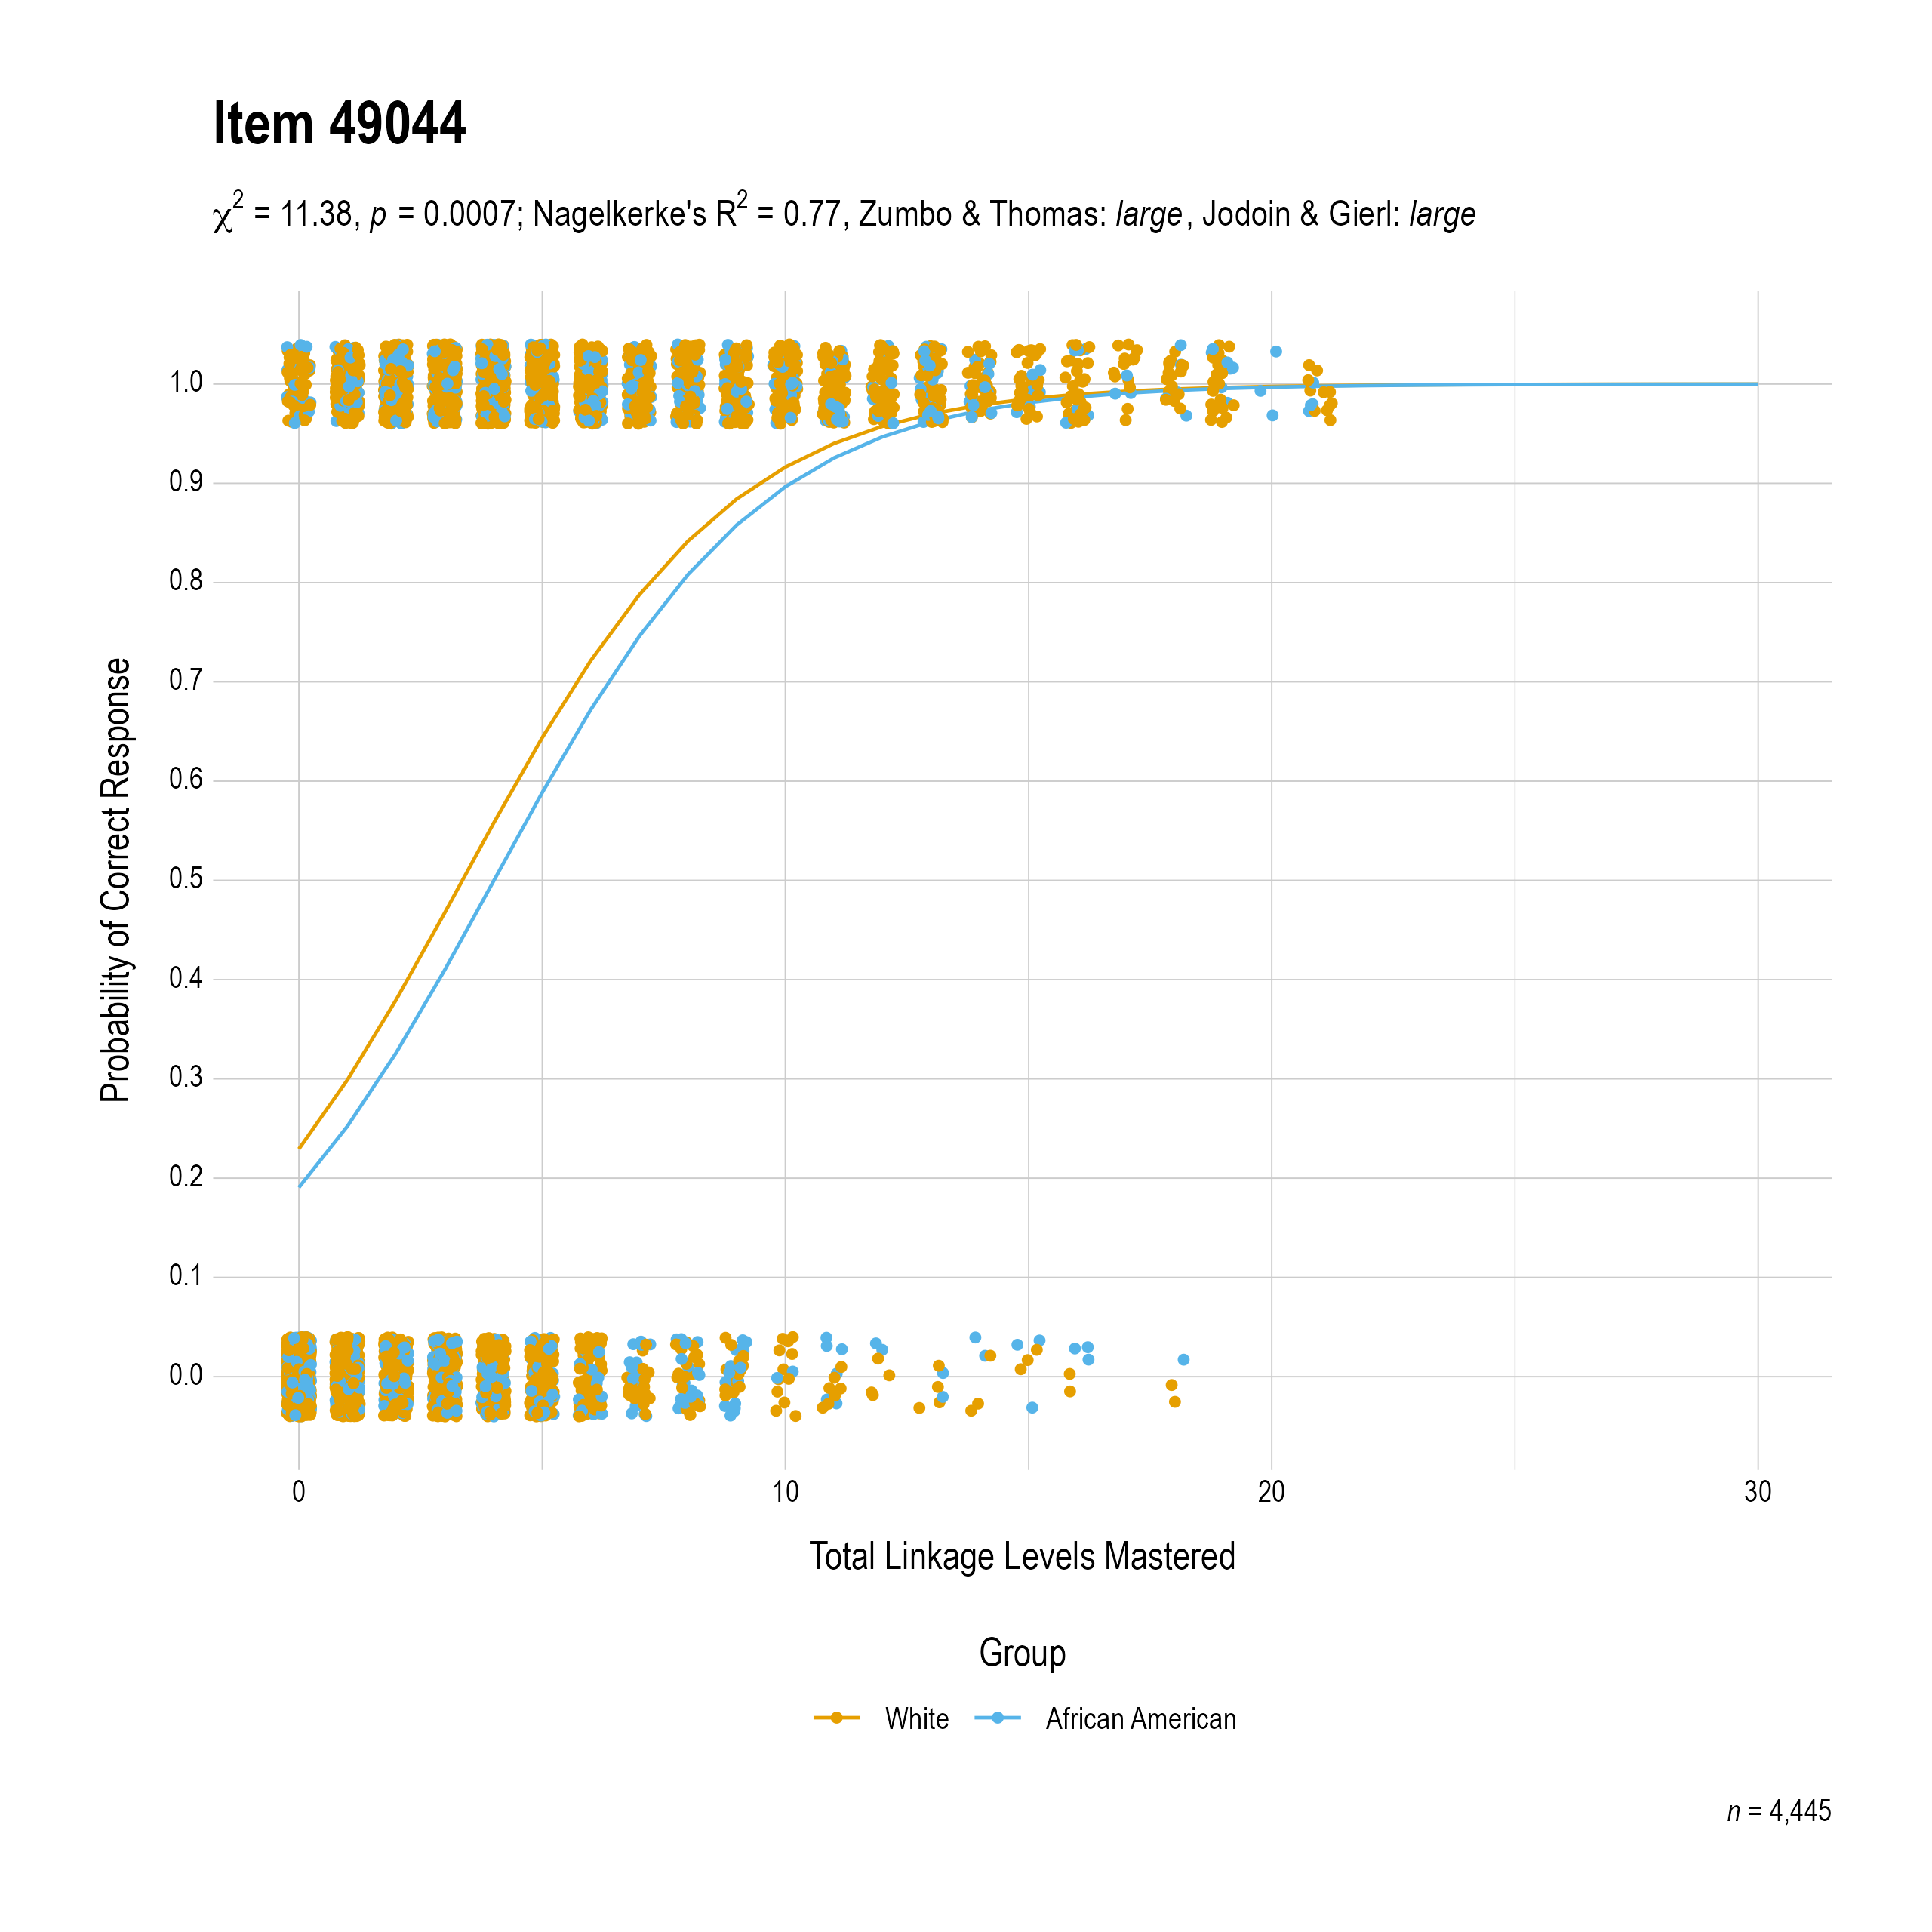 The plot of the uniform race differential item function evidence for Science item 49044. The figure contains points shaded by group. The figure also contains a logistic regression curve for each group. The total linkage levels mastered in is on the x-axis, and the probability of a correct response is on the y-axis.